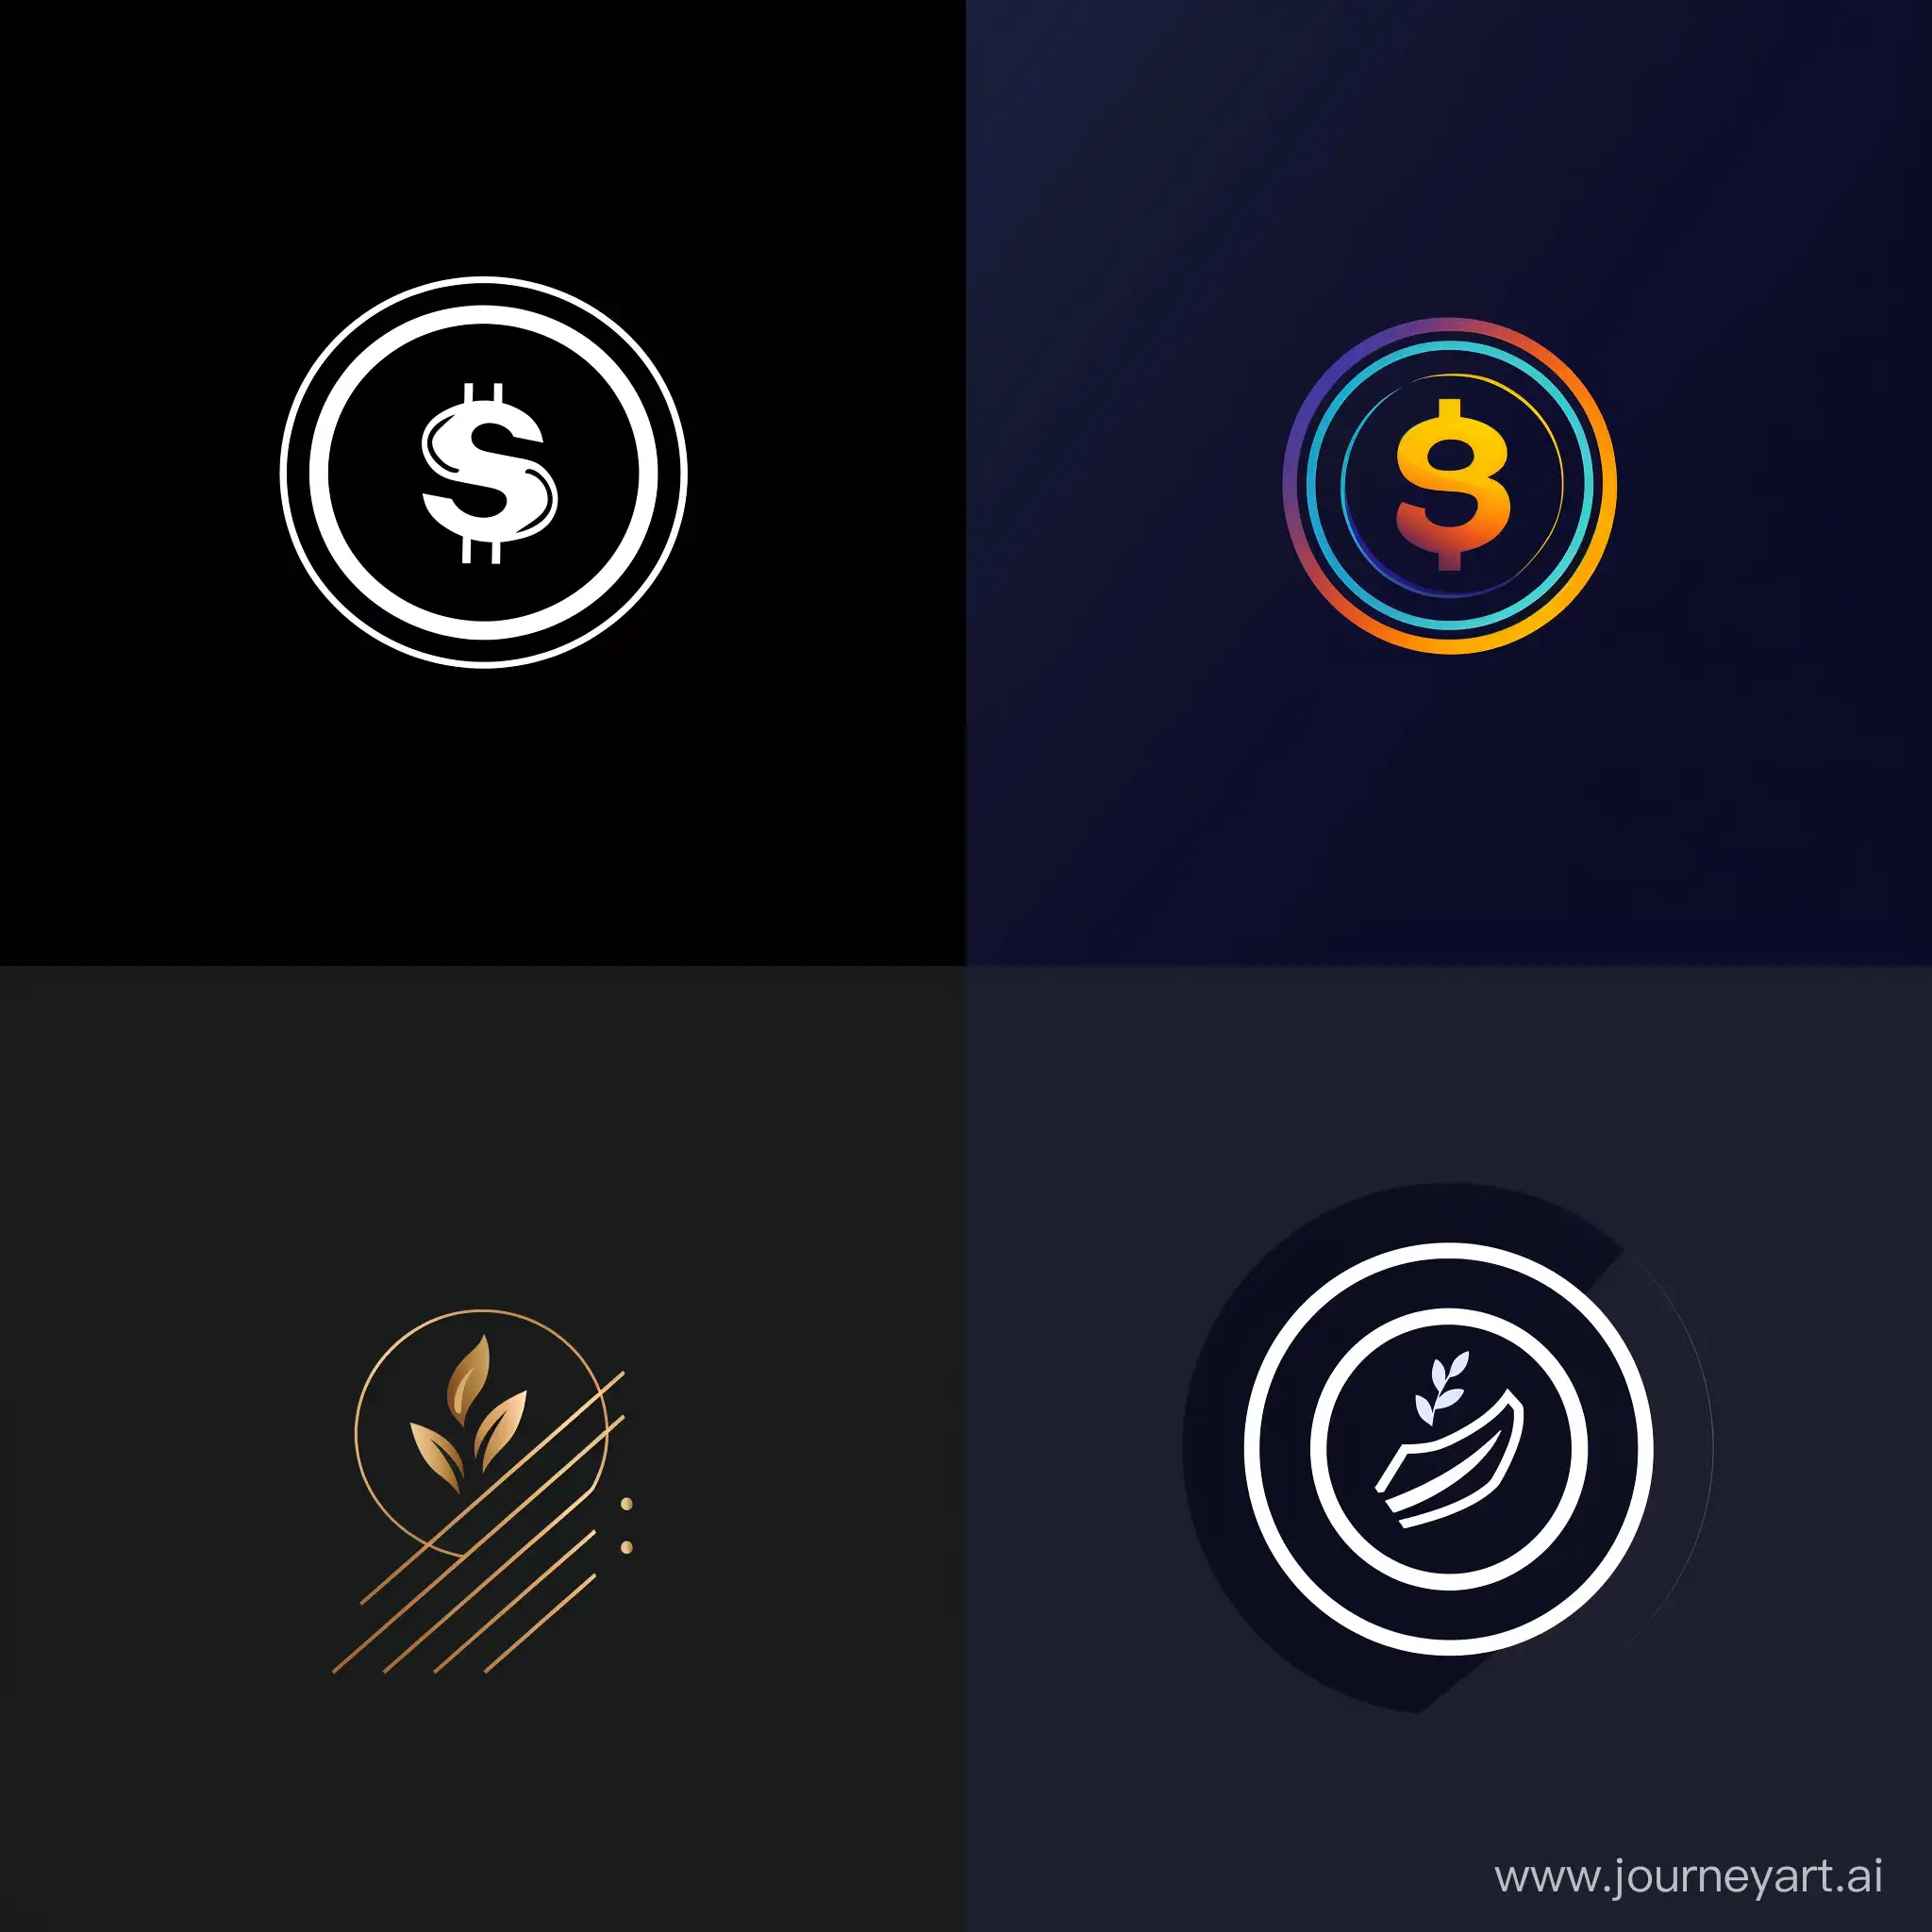 ﻿ Design a sleek and modern logo a finance business, incorporating a coin. The logo should convey professionalism and trust, while also embodying a sense of financial growth and stability. Feel free to explore different concepts and elements to create a memorable and impactful design